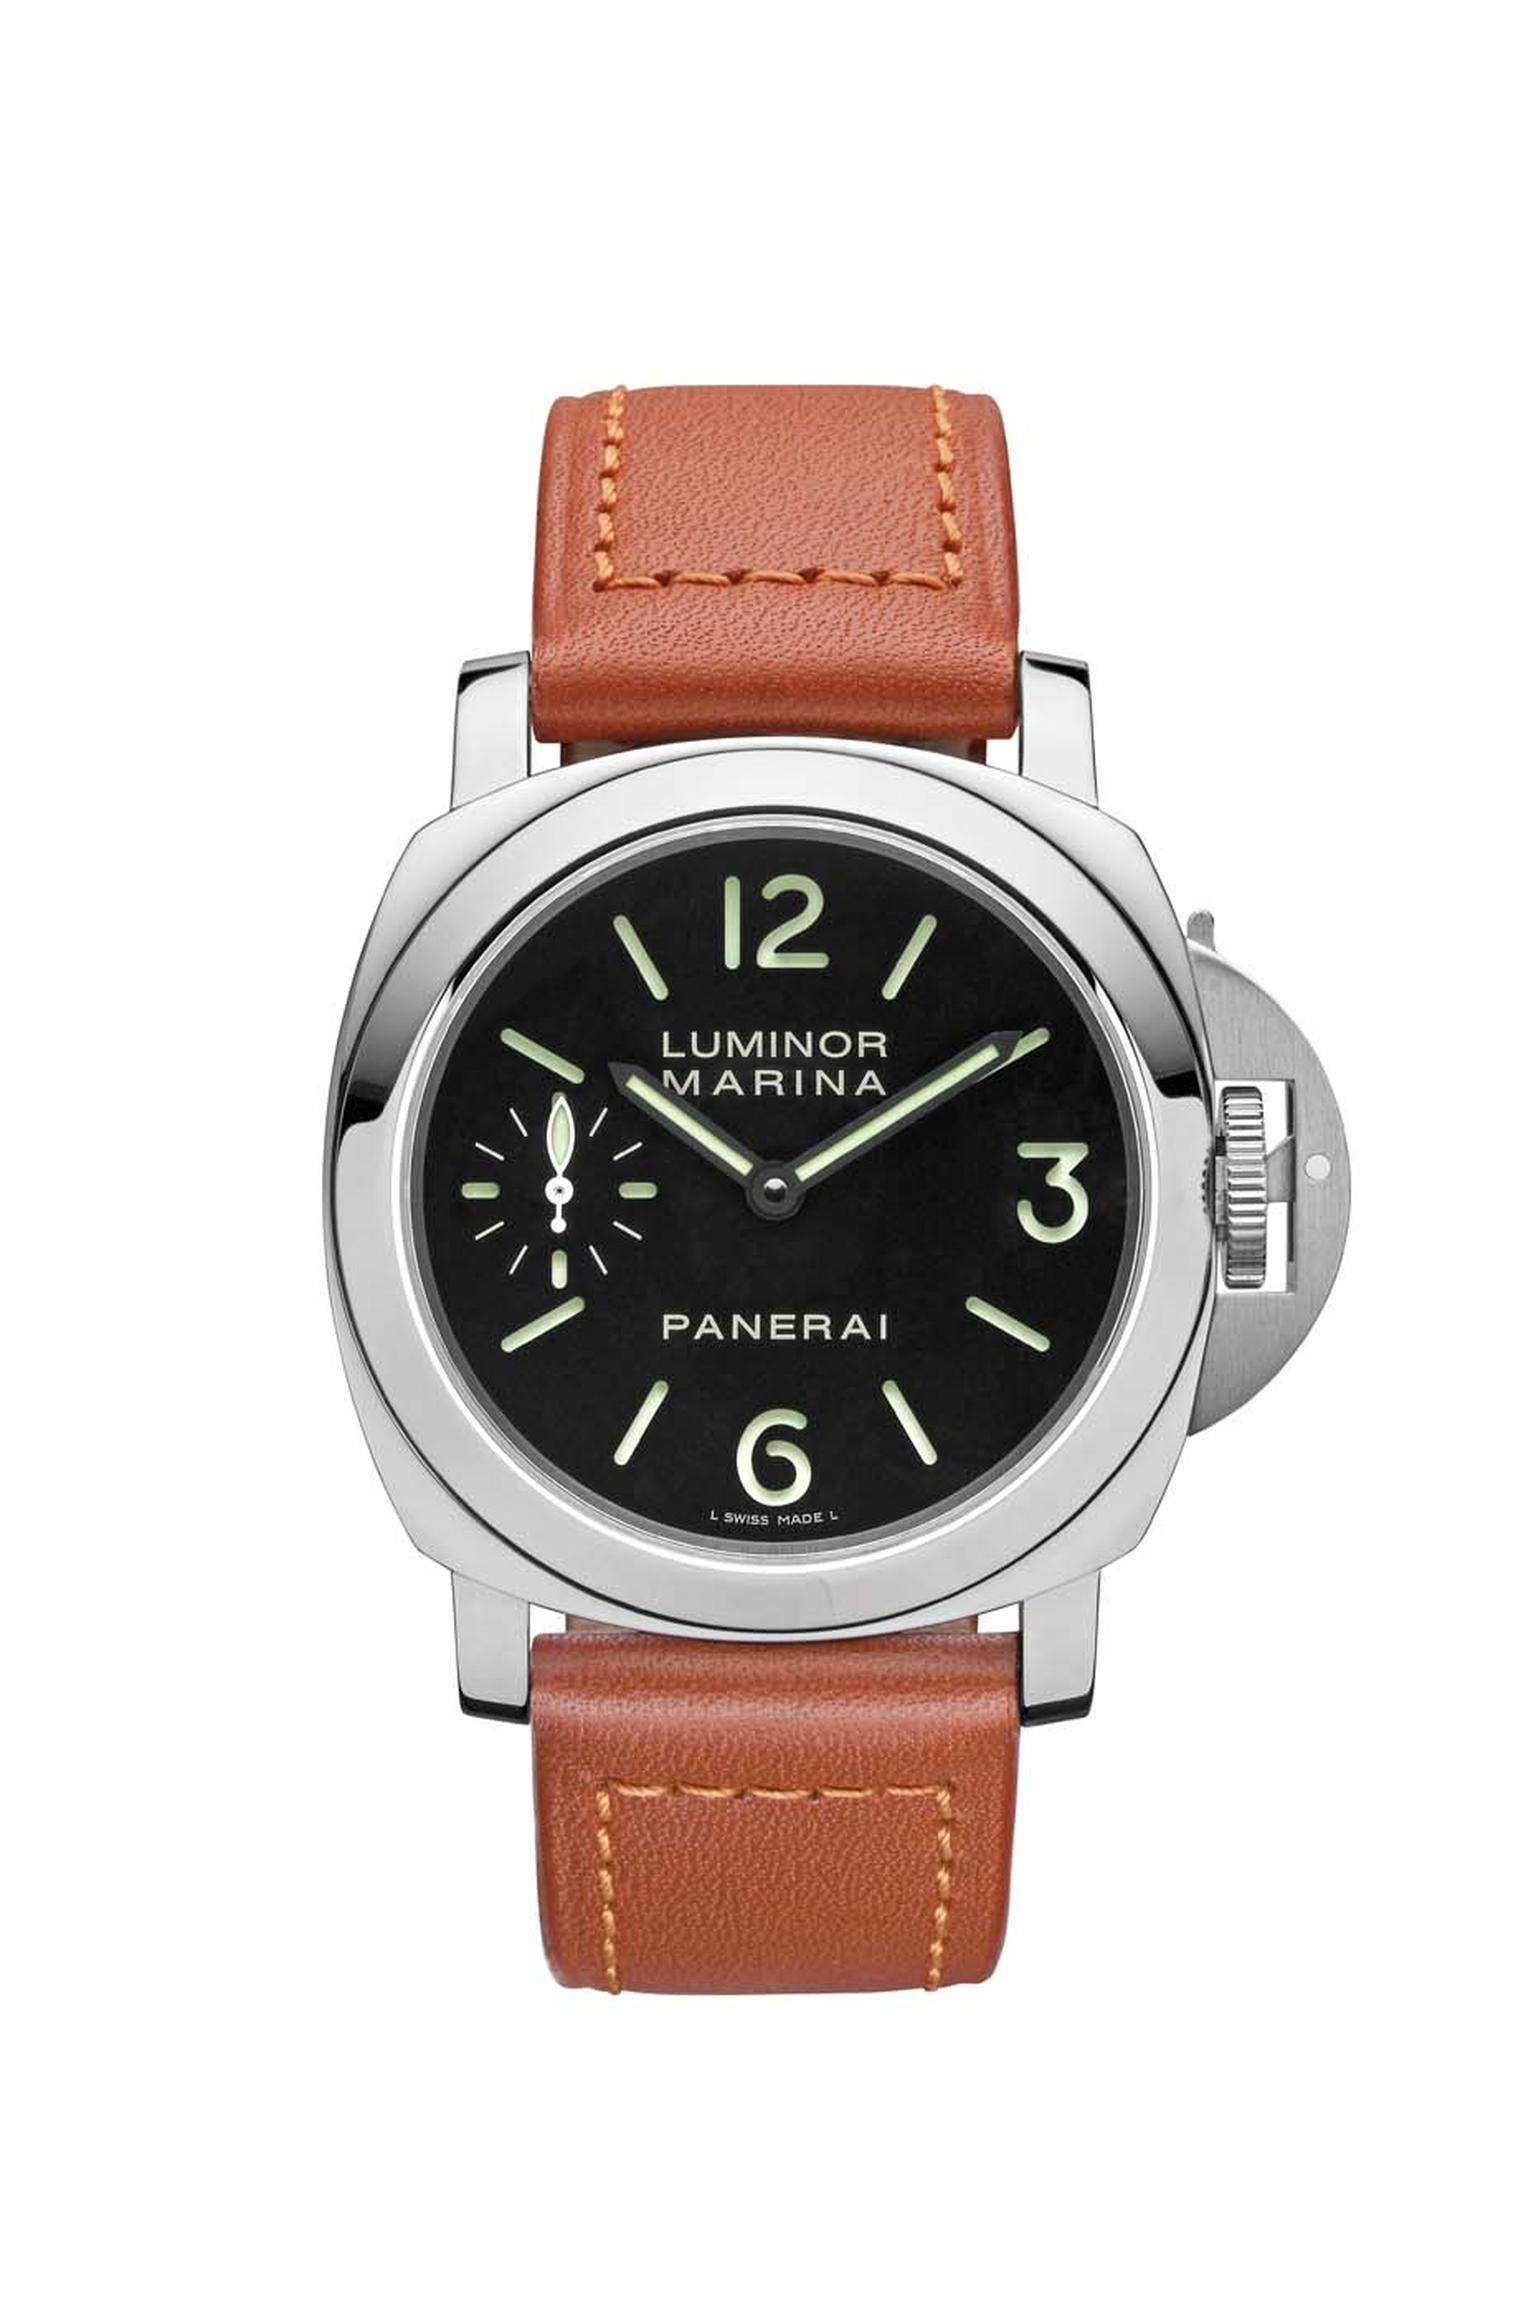 Panerai Luminor men's watch of 1997 features the large crown-protecting bridge with a lever to increase the watch's waterproof properties.